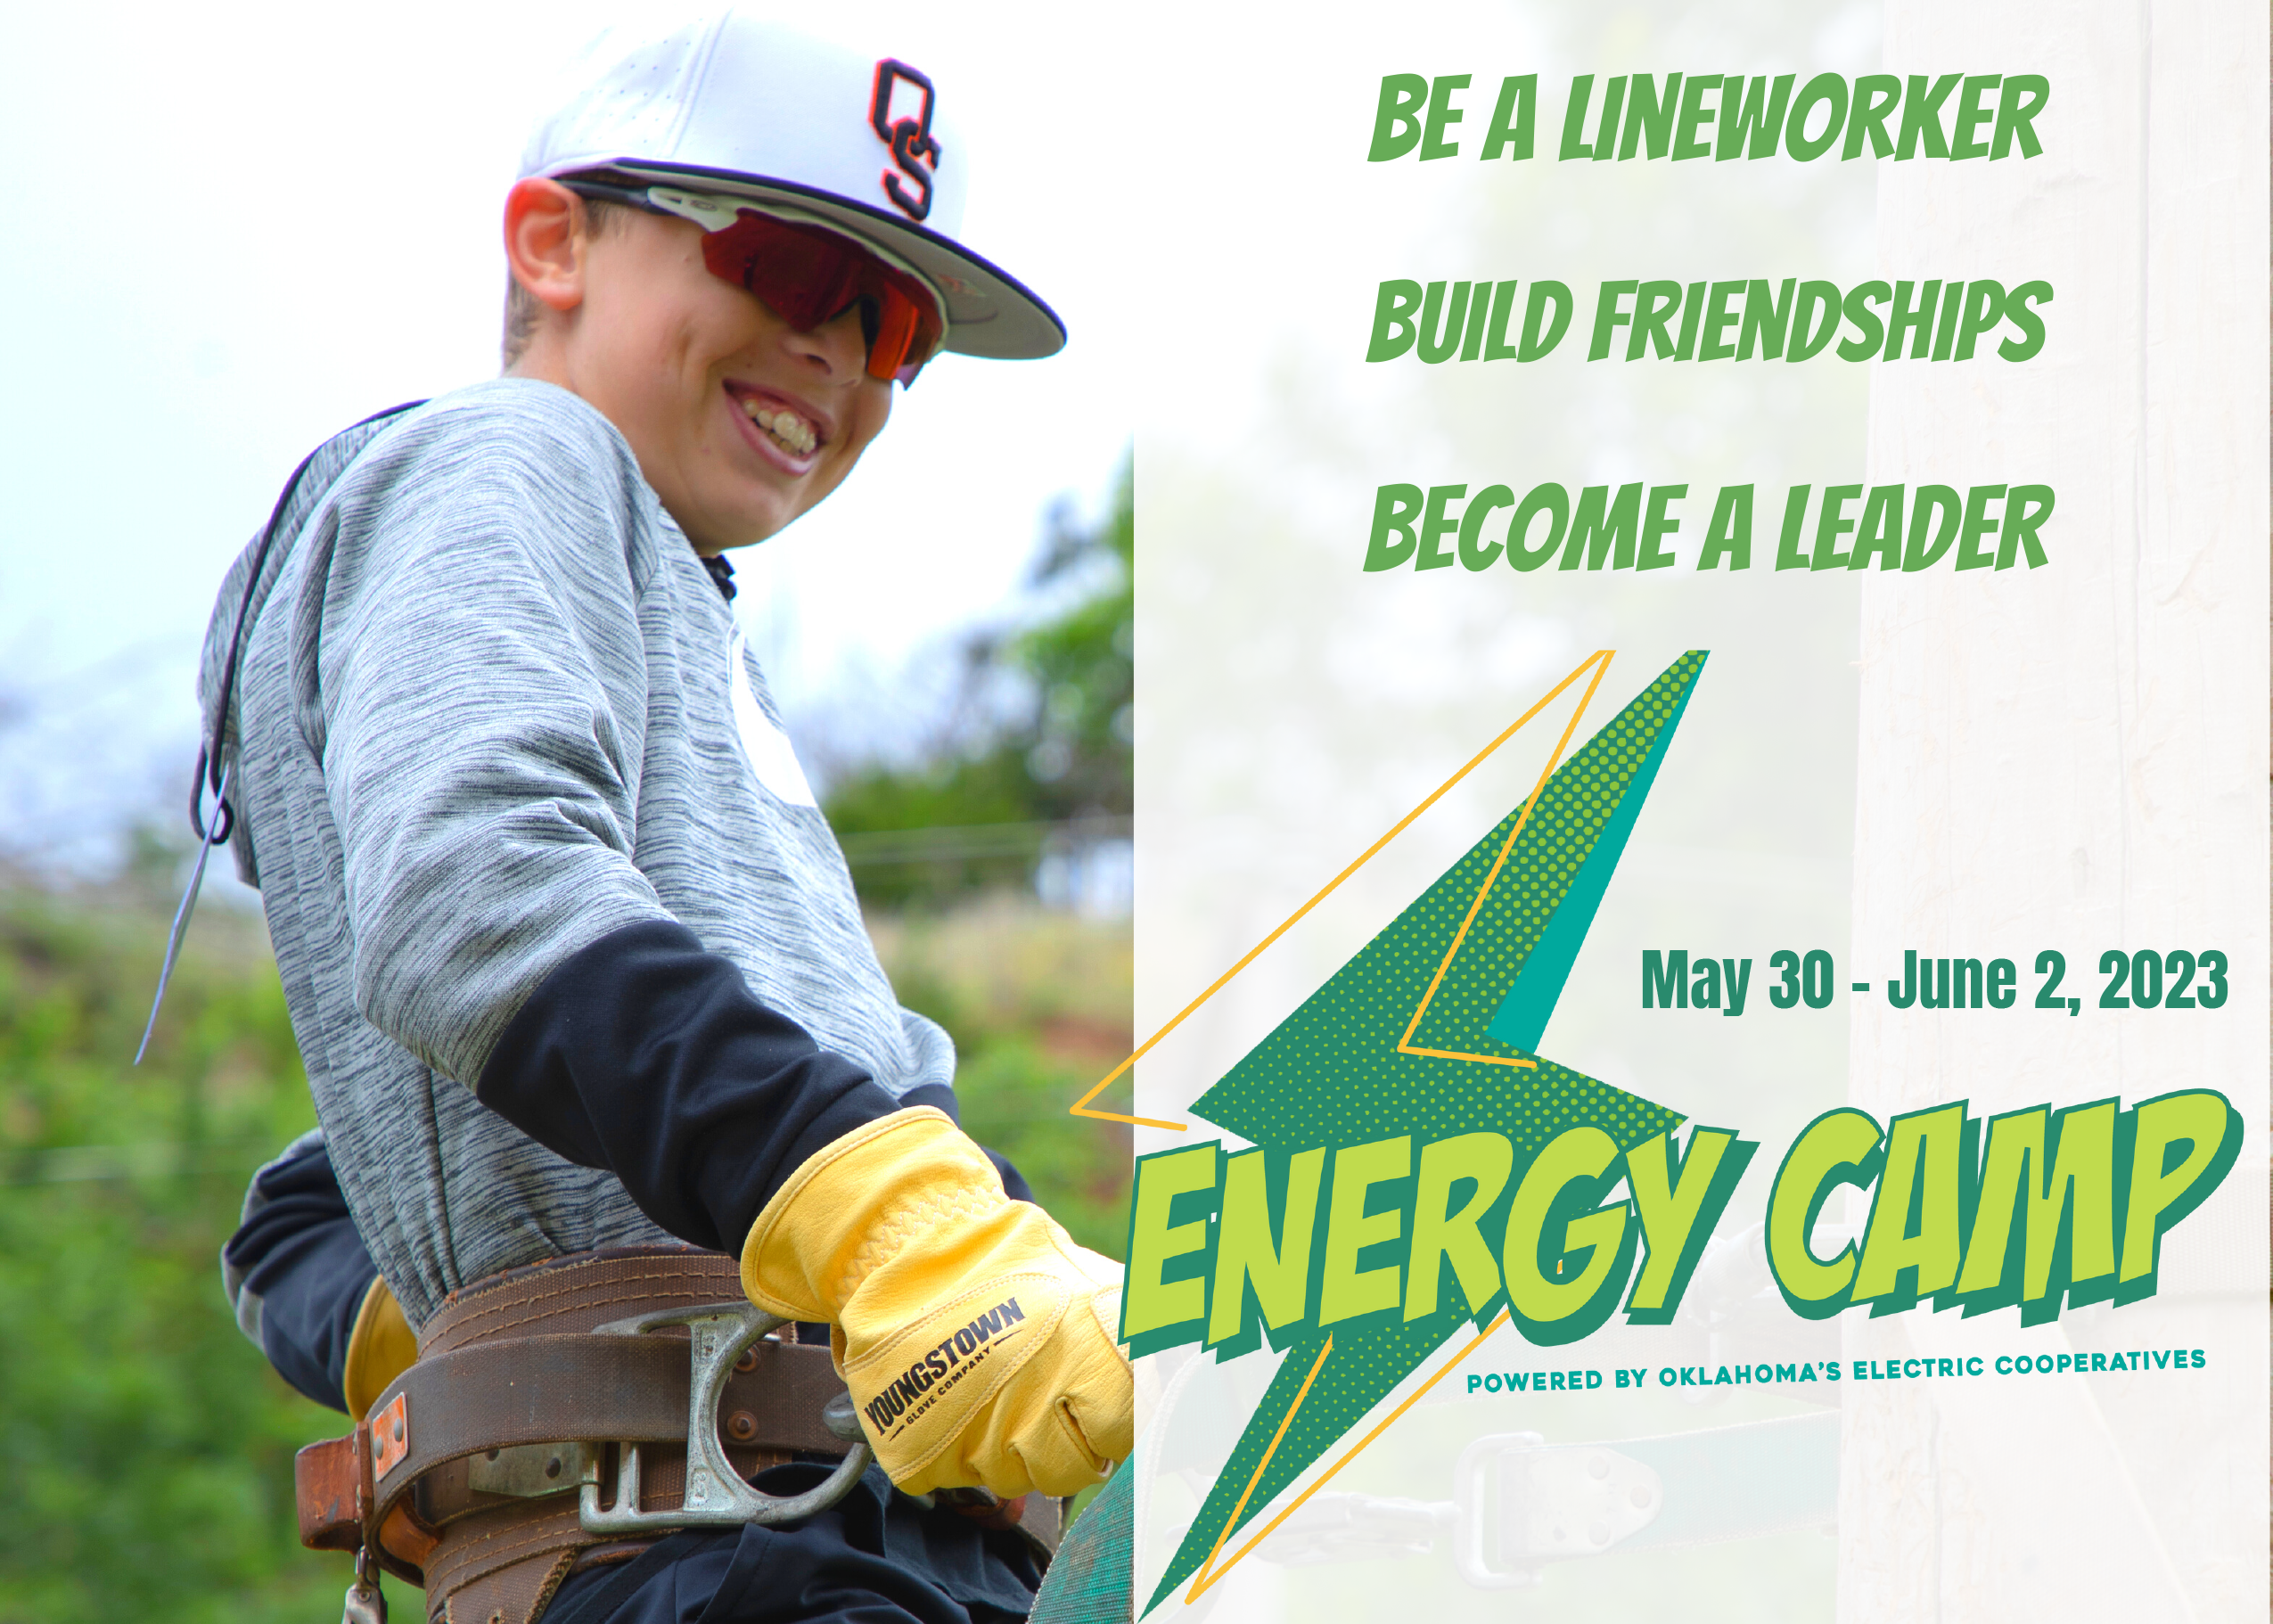 Apply for Energy Camp